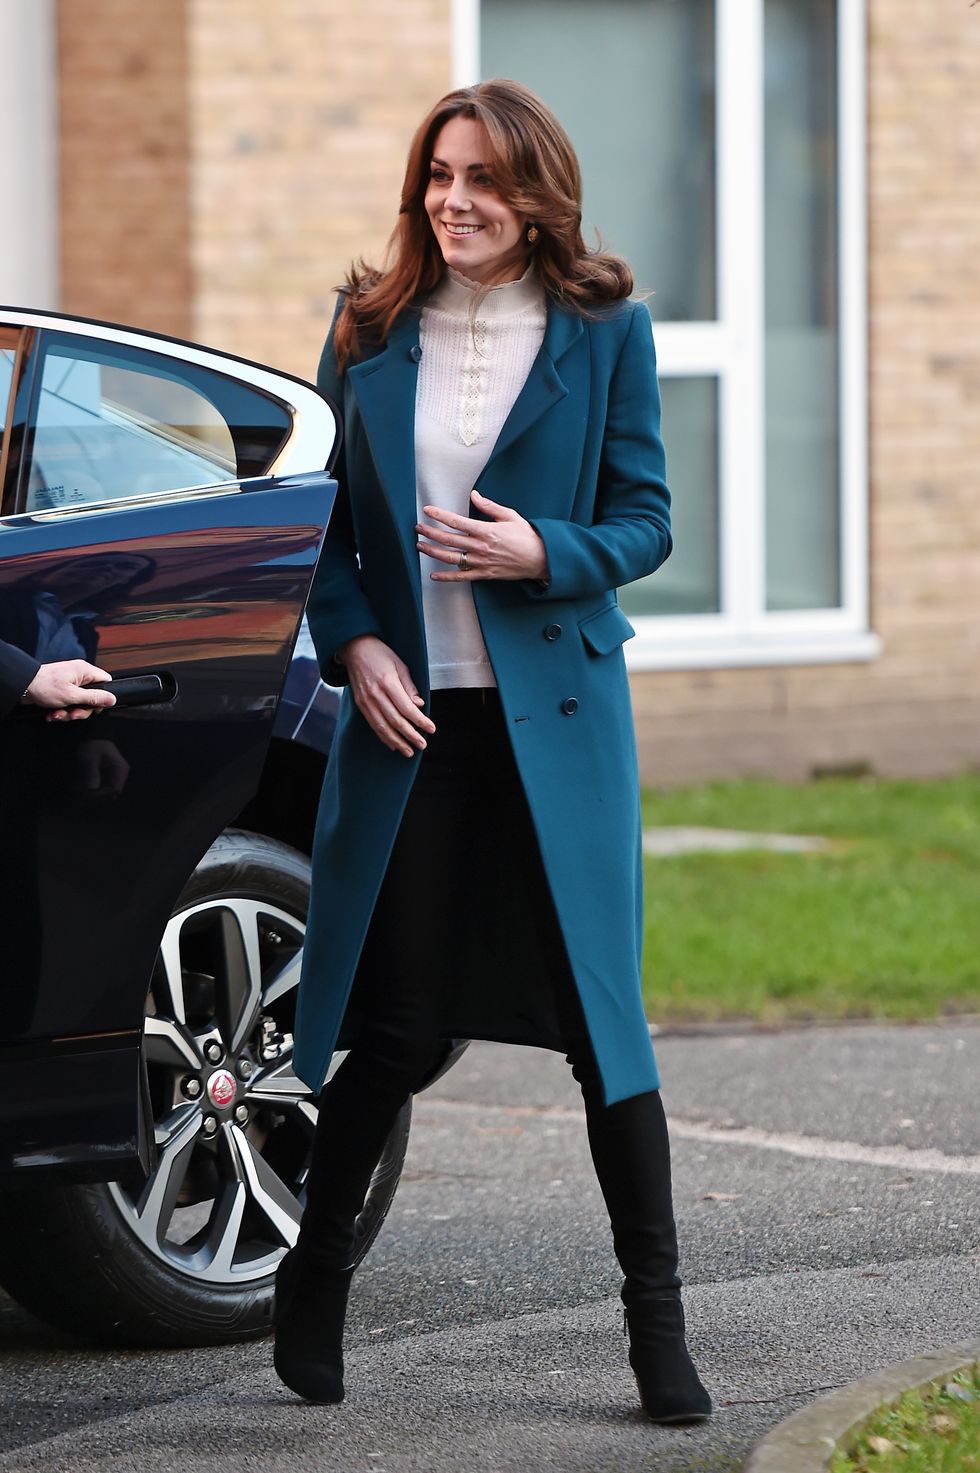 Kate Middleton Wore a Teal Coat and Skinny Black Jeans for Nursery Visit